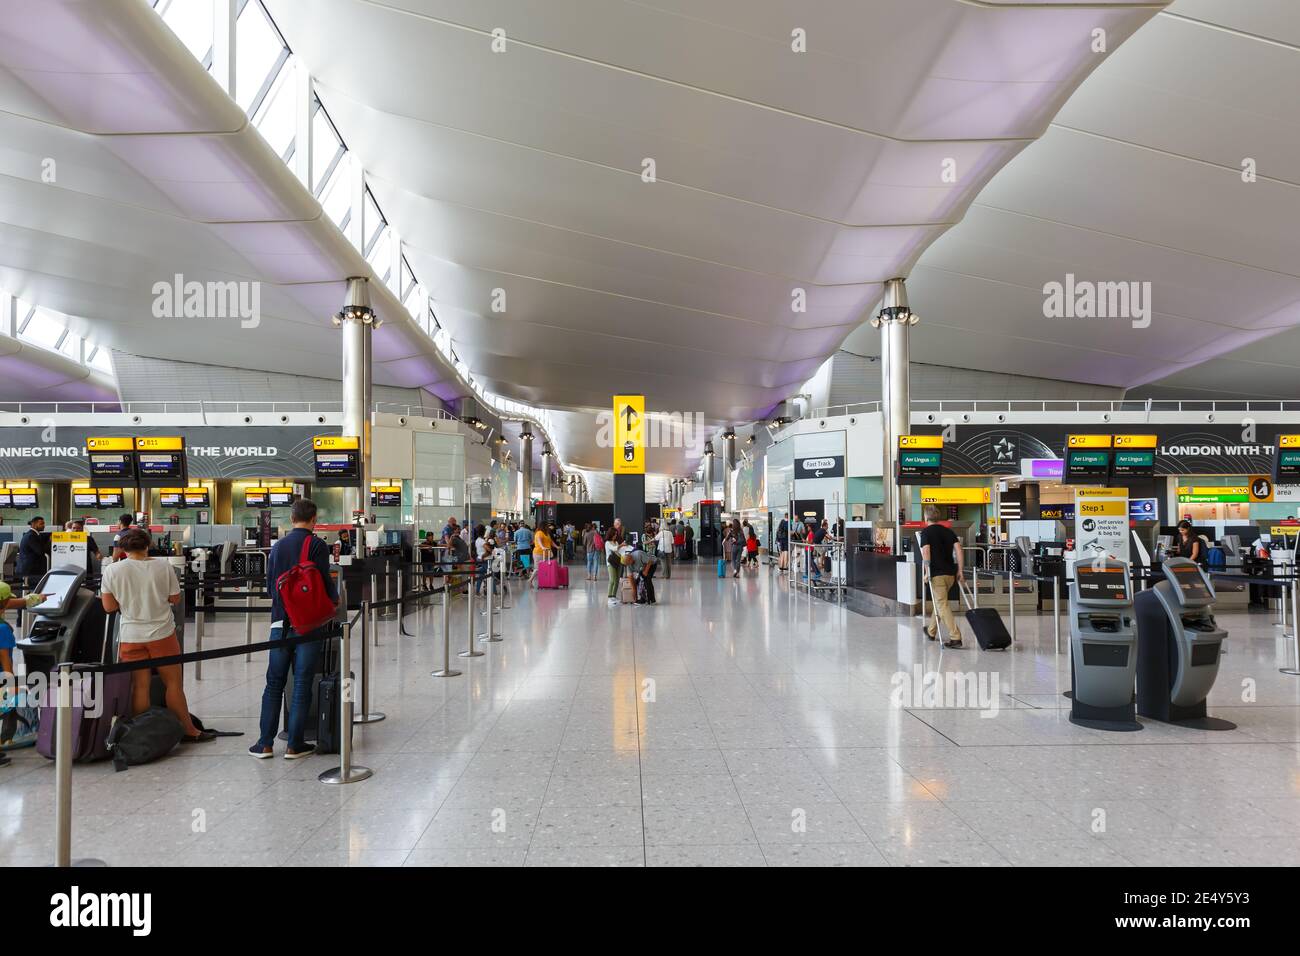 London, United Kingdom - August 1, 2018: Terminal 2 of London Heathrow airport (LHR) in the United Kingdom. Stock Photo